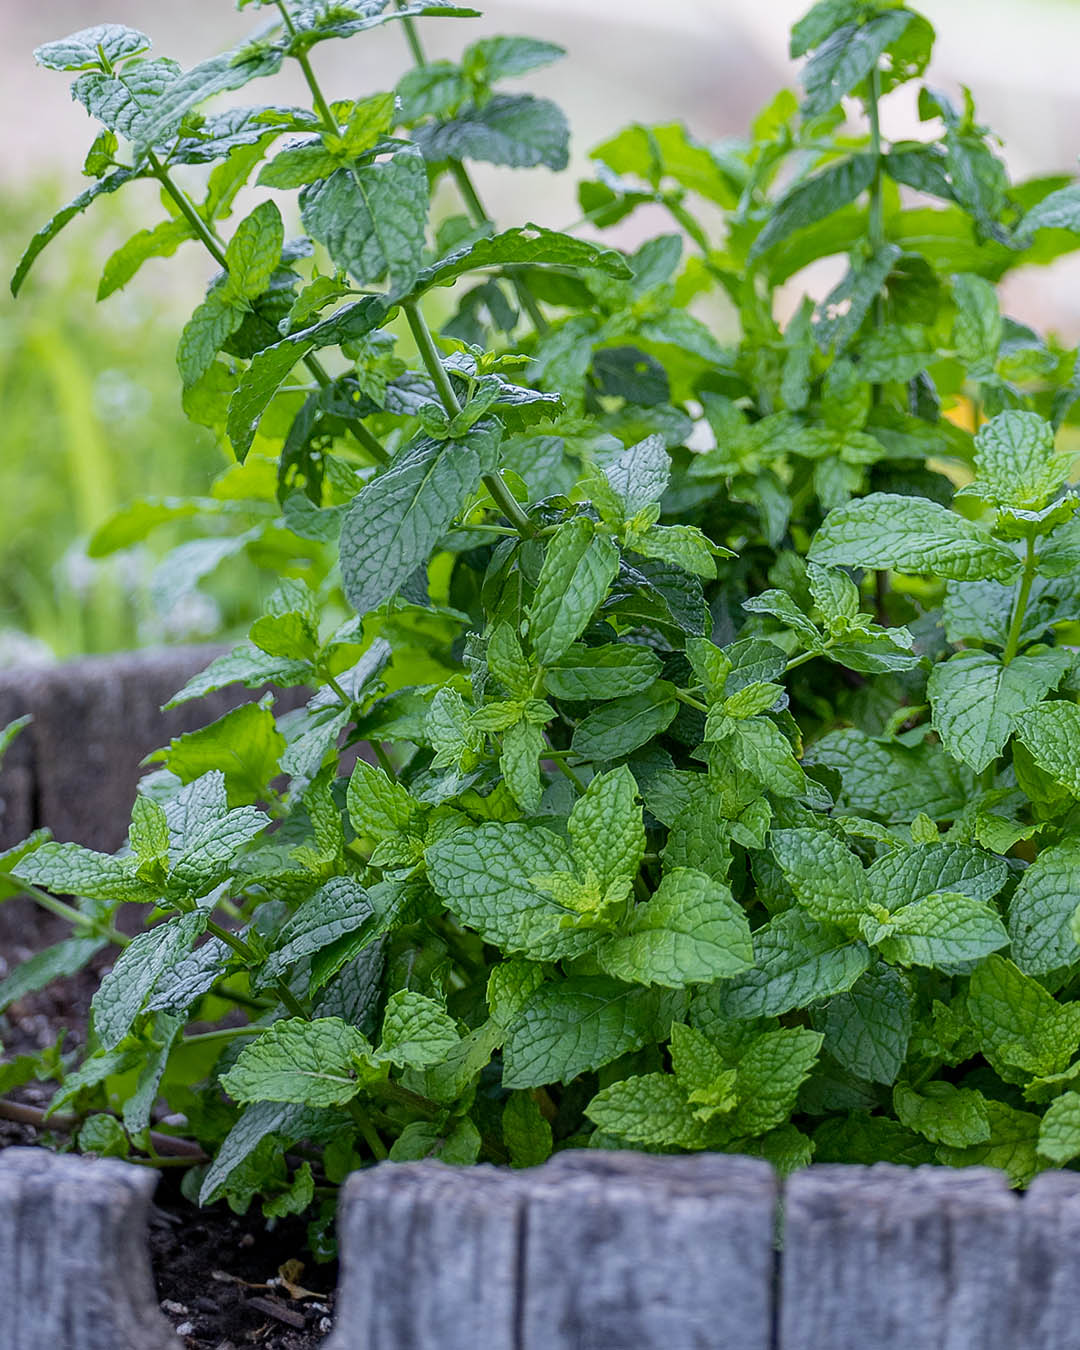 Have you been trying to grow mint because you heard it's one of the easiest plants to grow? If you've found that it takes a little more to grow mint successfully, you're not alone. Here's what I've learned.